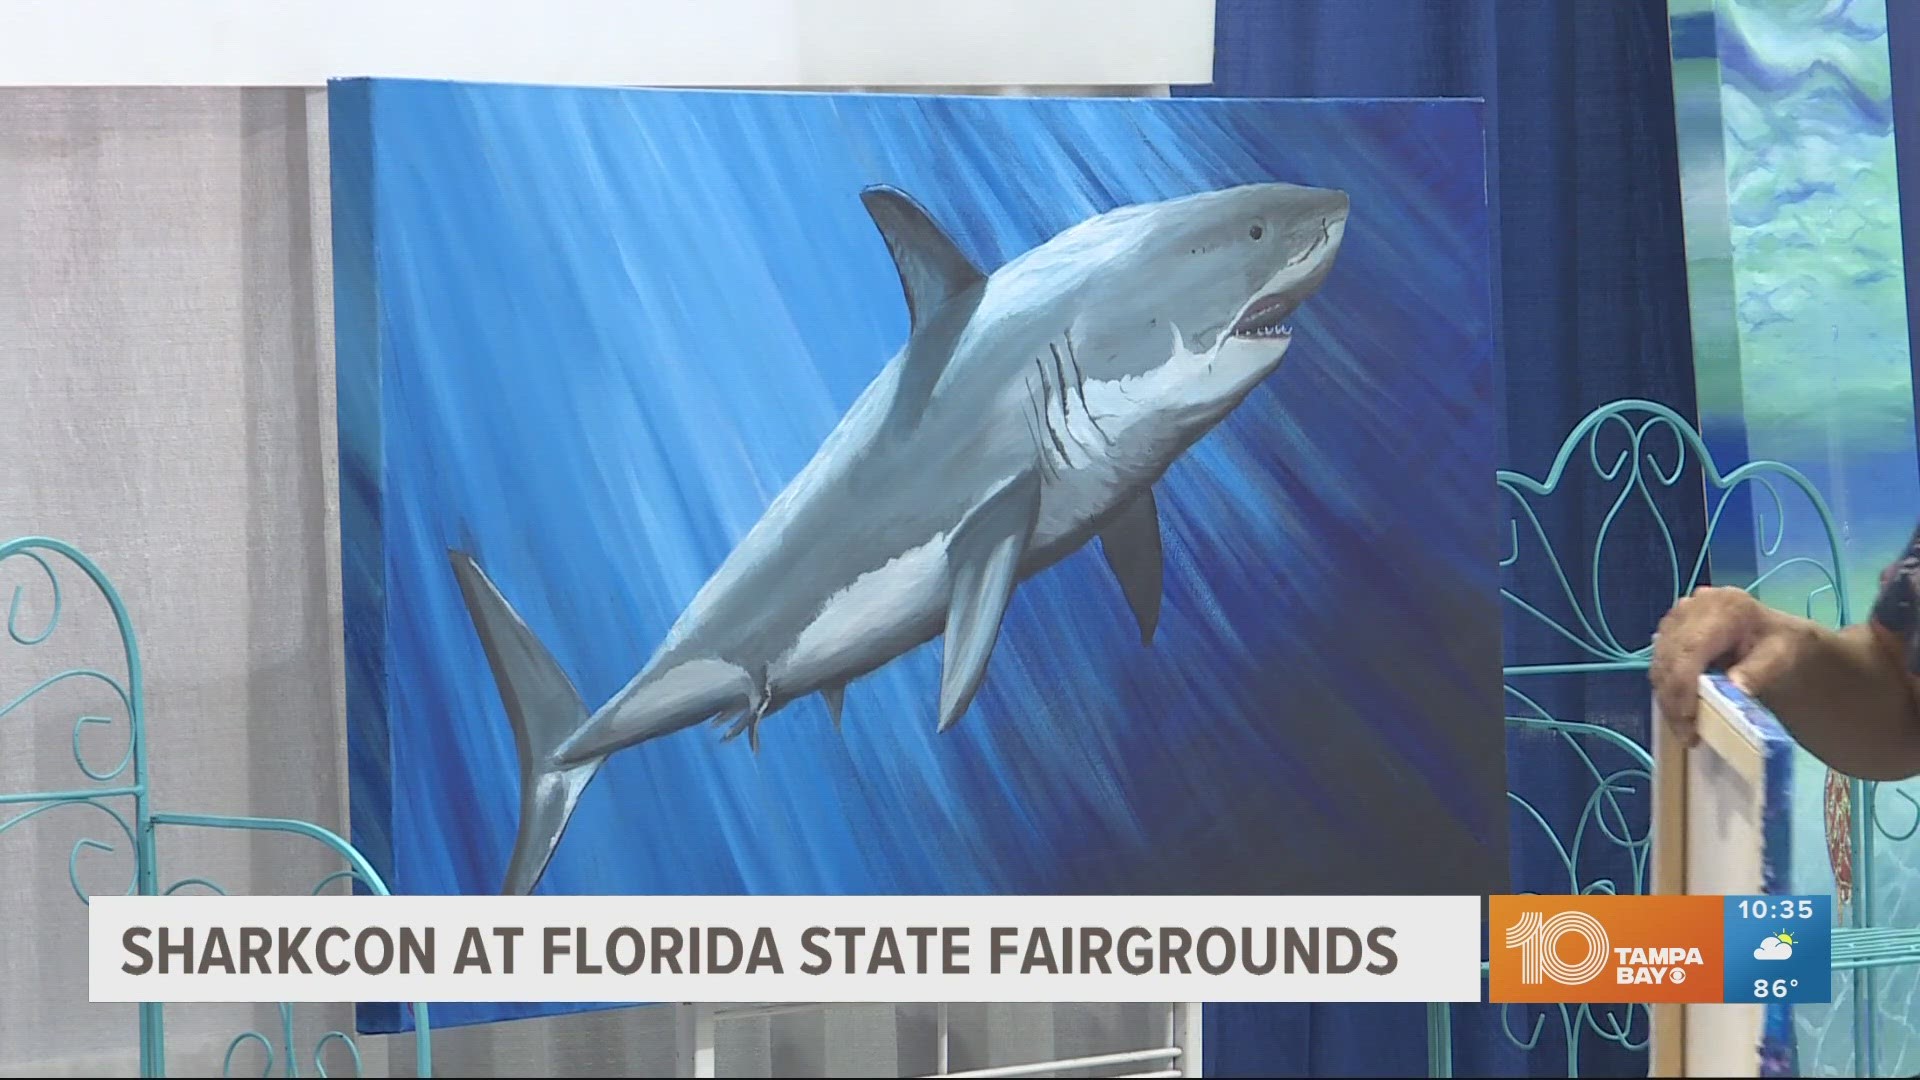 Shark enthusiasts can get their shark fill at the Florida State Fairgrounds Expo Hall.